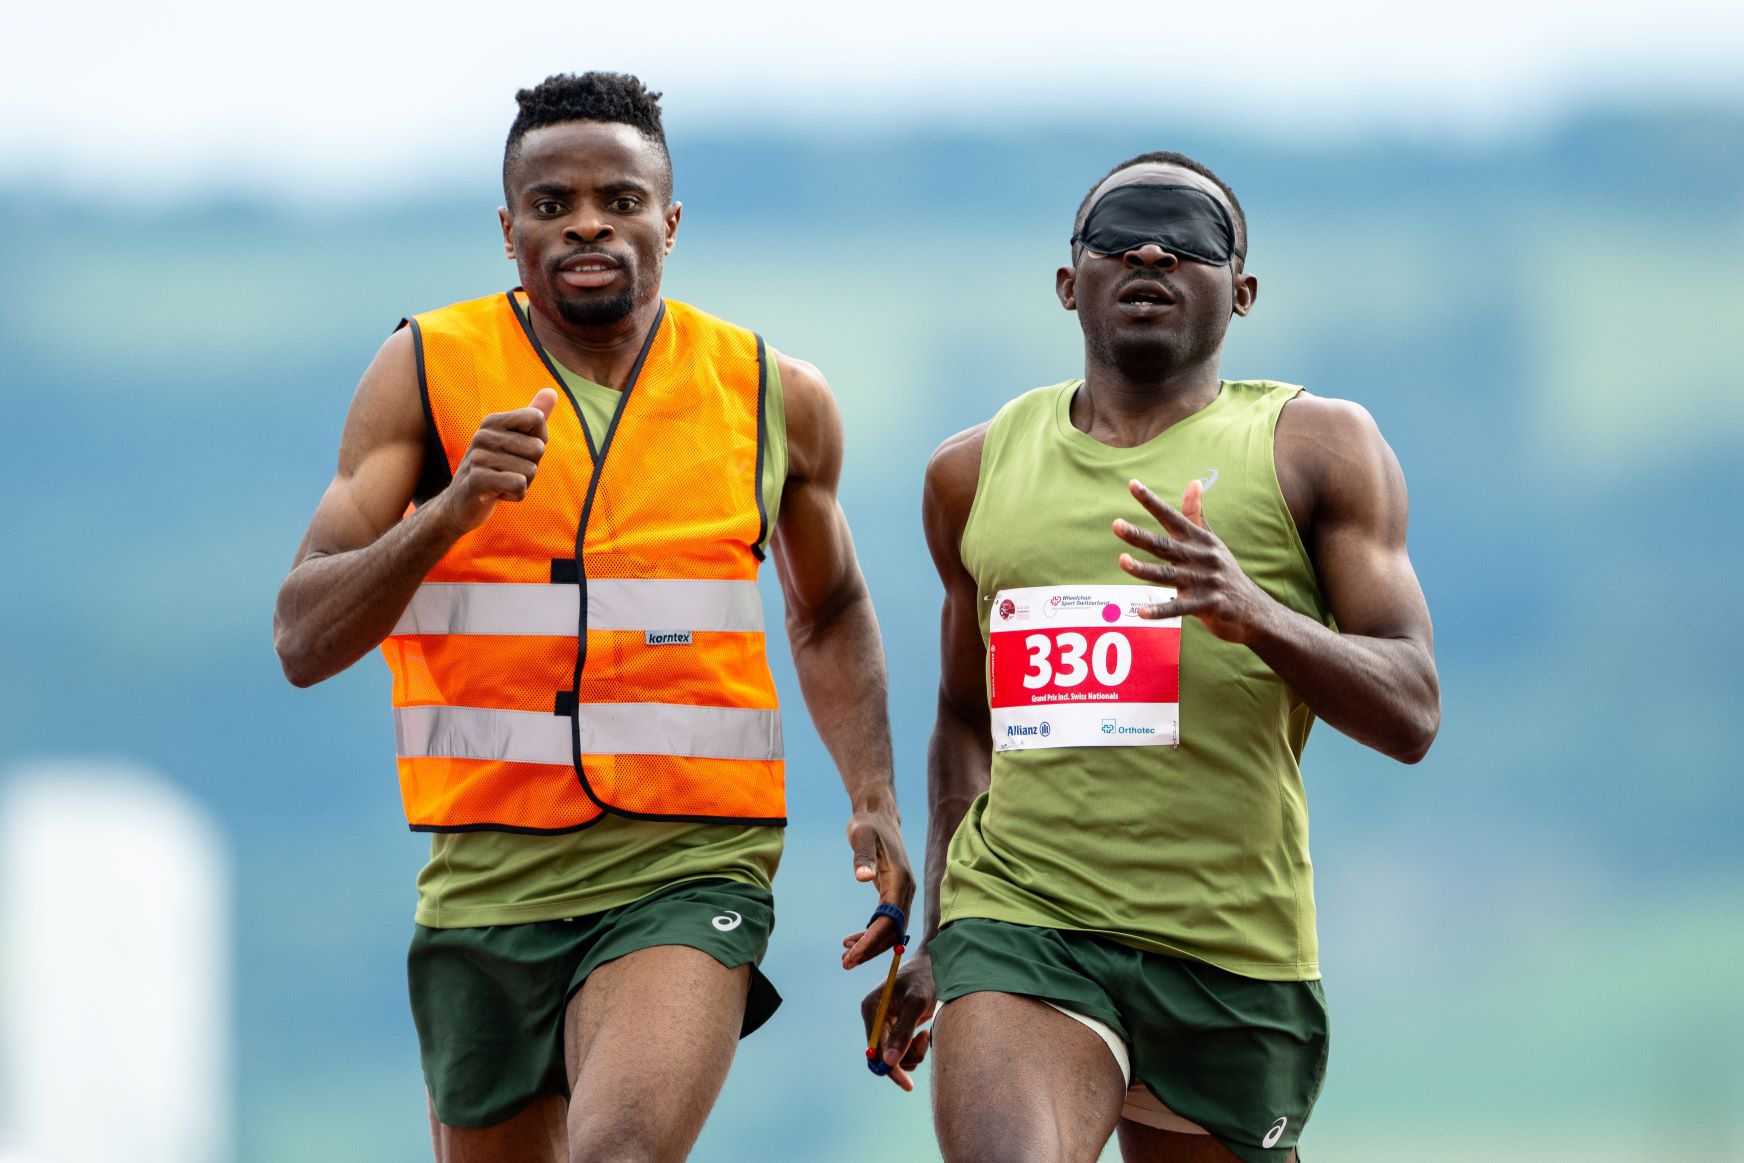 A male sprinter and his sighted guide competing